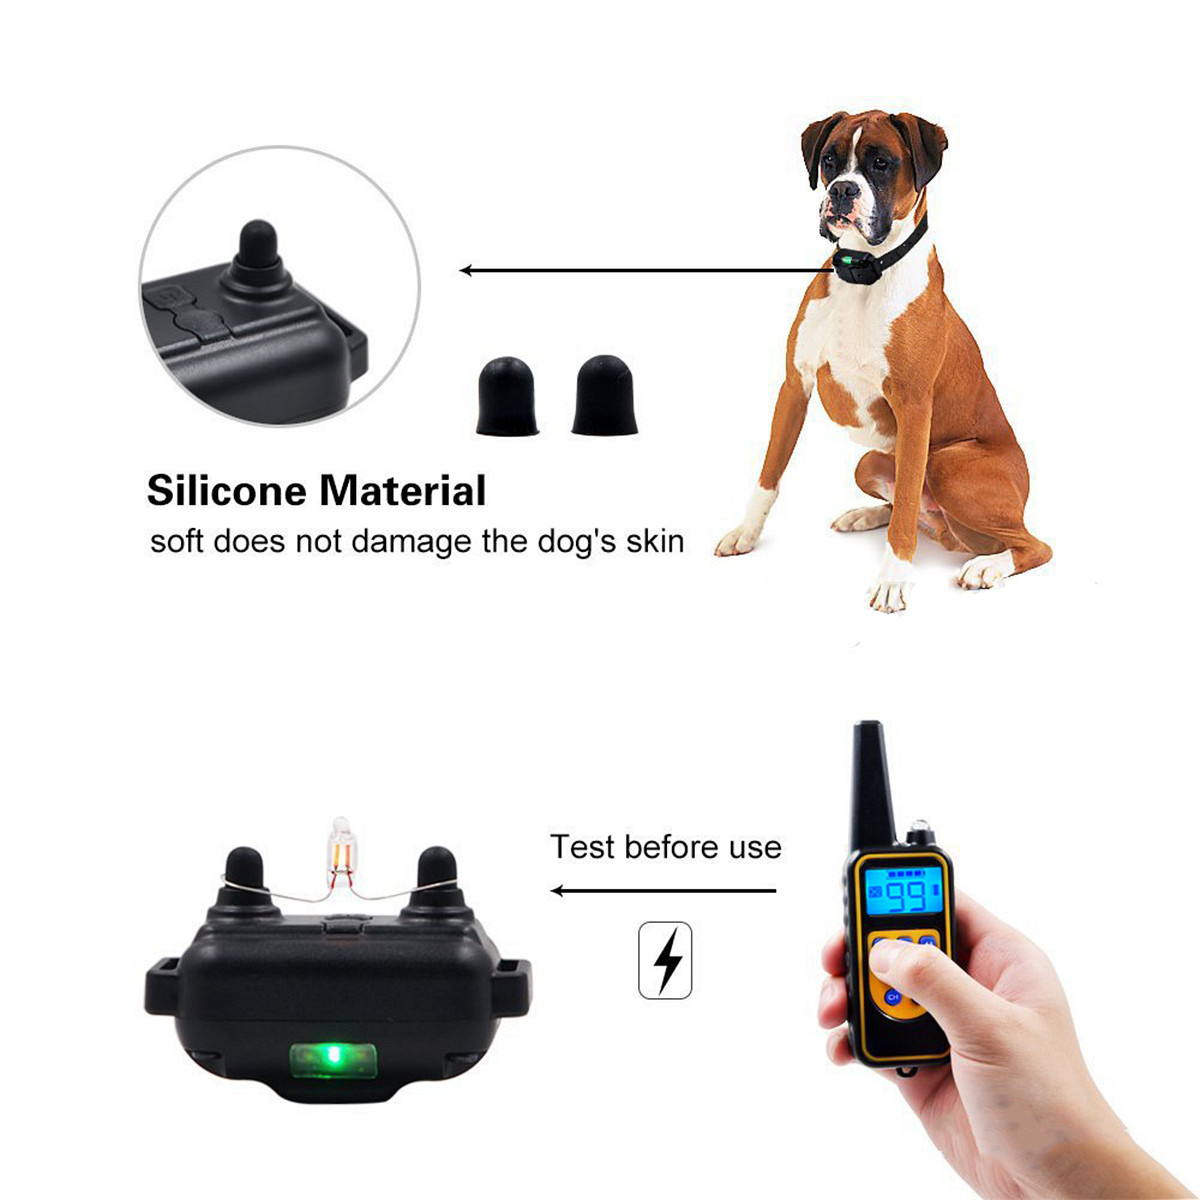 Waterproof-Rechargeable-Shock-Vibration-Sound-Remote-123-Dog-Training-Collar-Remote-Controller-1380124